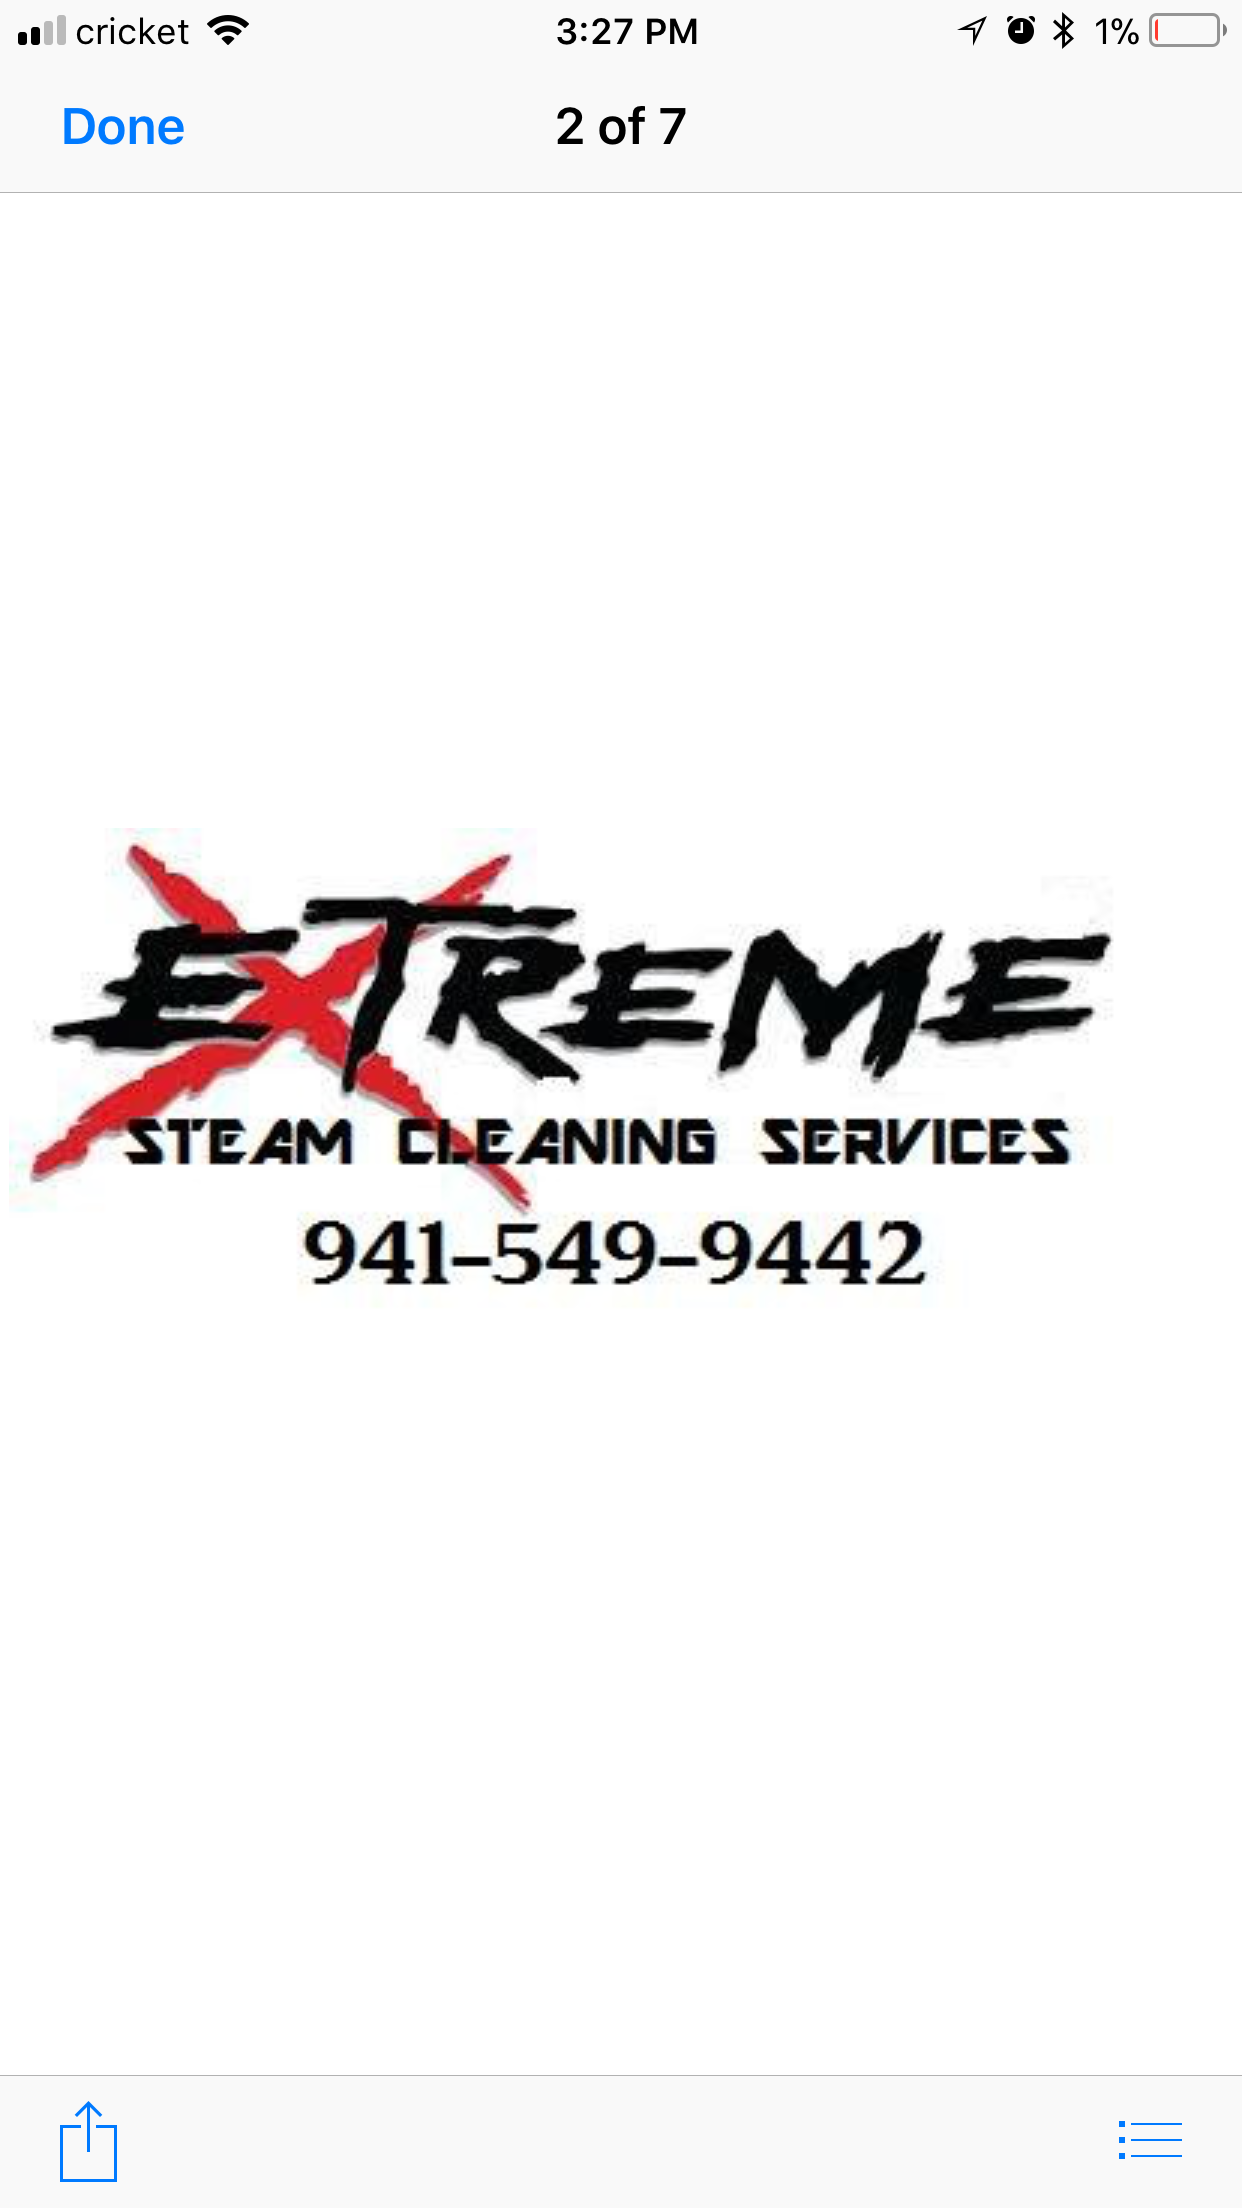 Extreme Steam Cleaning Services, LLC Logo